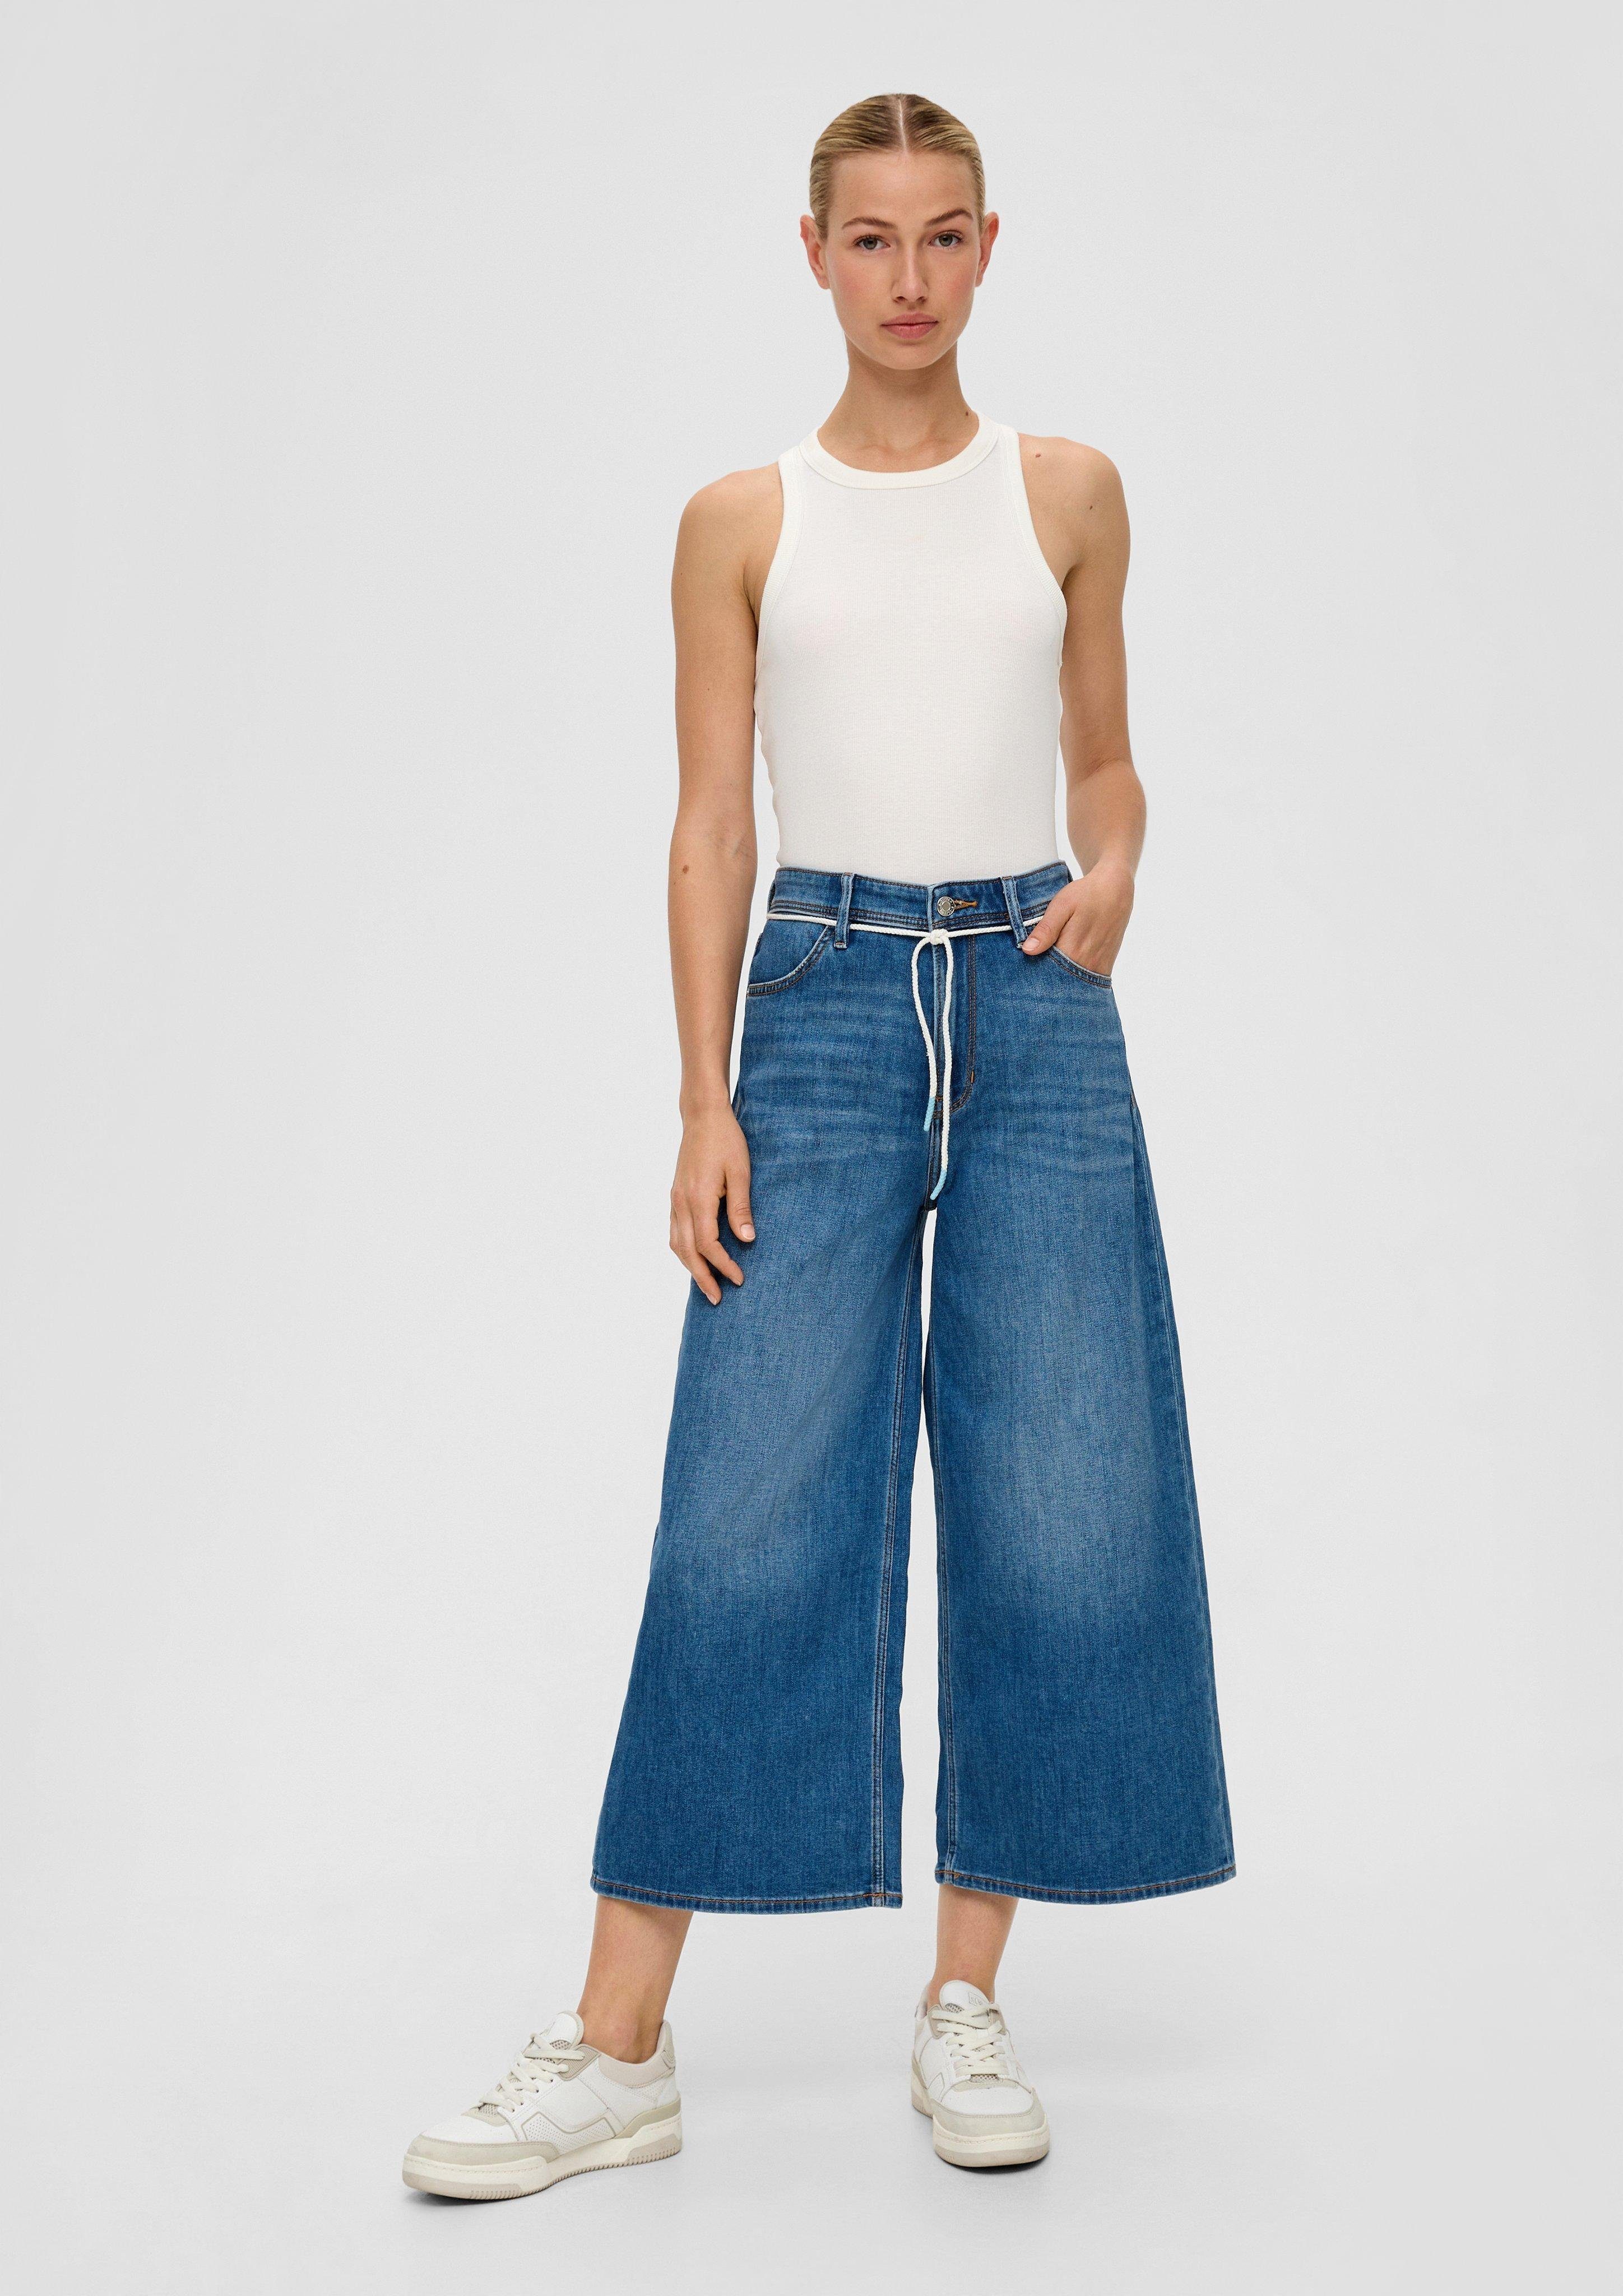 Rise Regular Suri Wide / Leg s.Oliver Waschung, Jeans-Culotte 7/8-Jeans / Fit High / Label-Patch